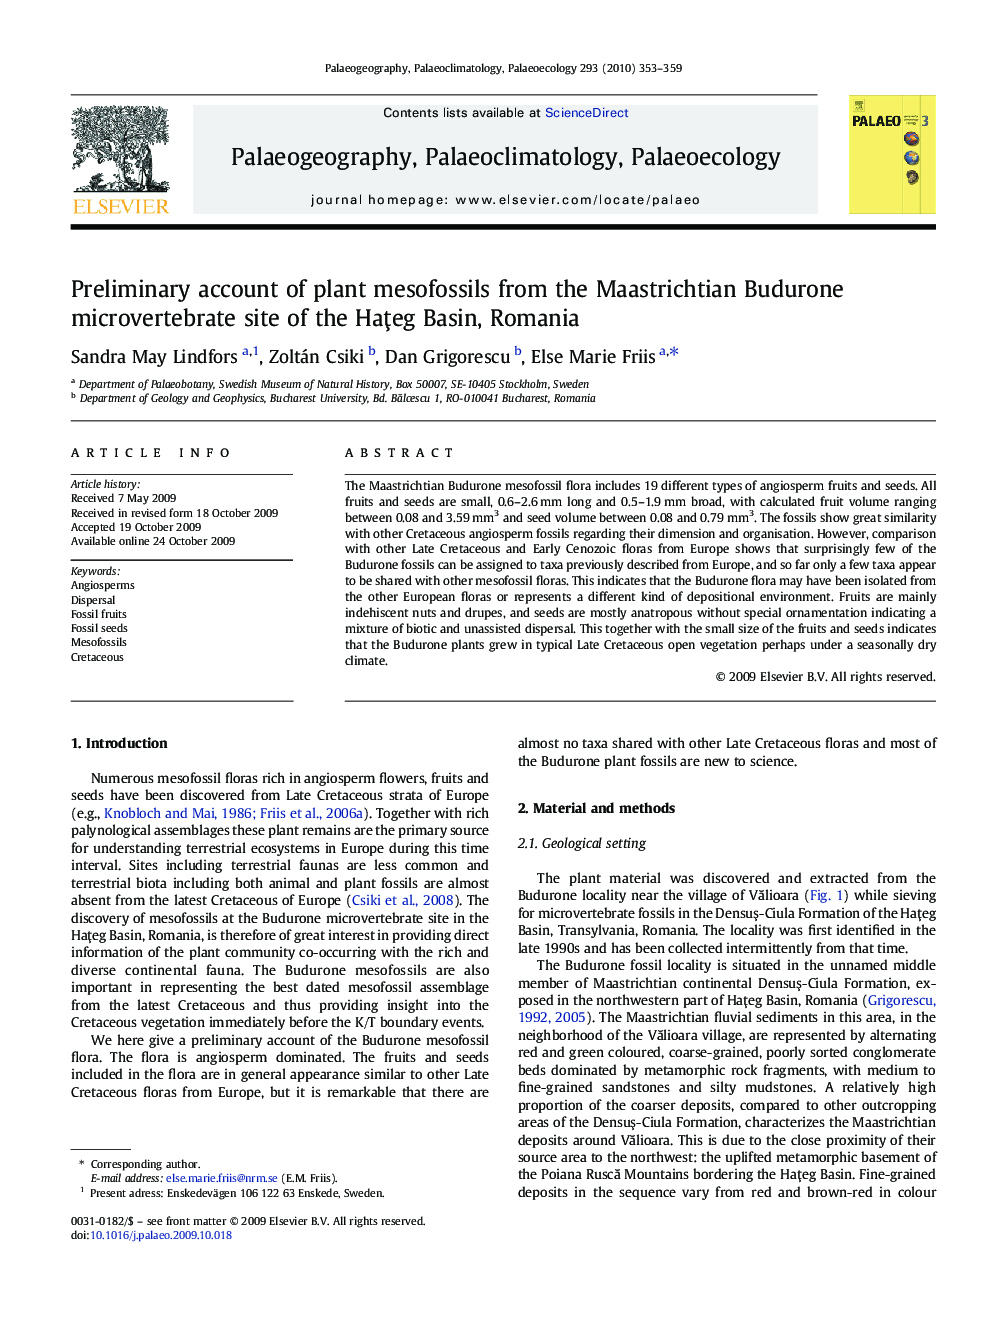 Preliminary account of plant mesofossils from the Maastrichtian Budurone microvertebrate site of the Haţeg Basin, Romania